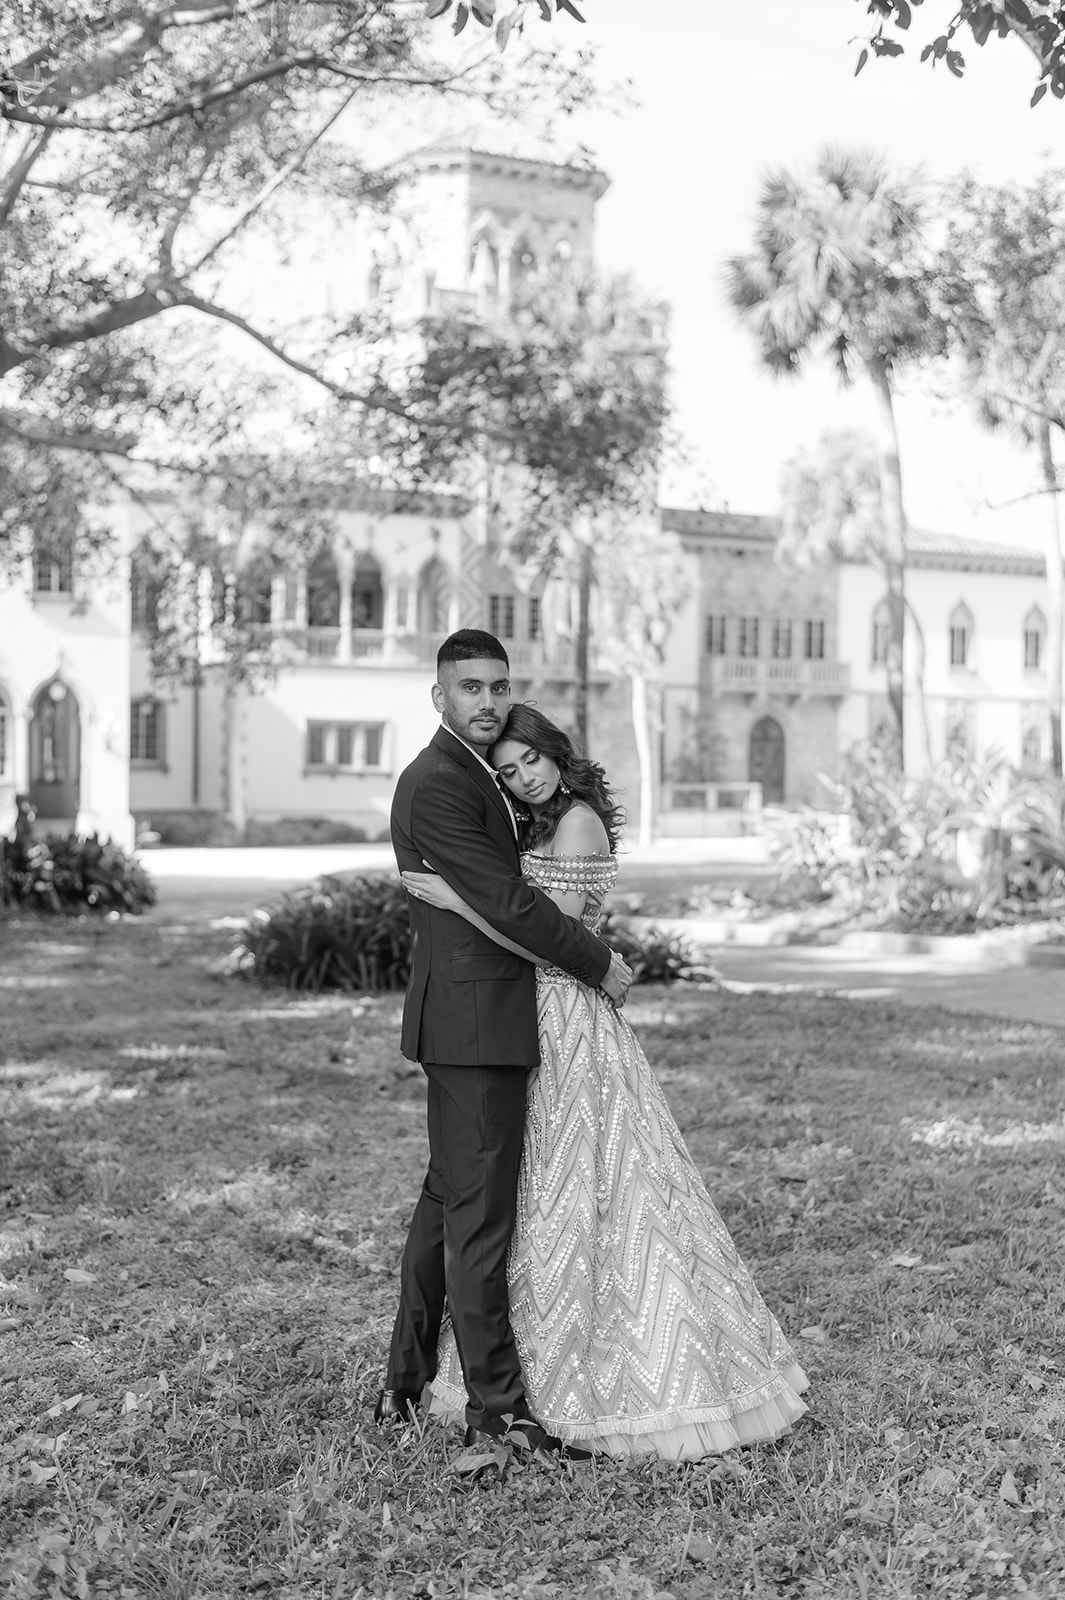 "Ringling Museum engagement shoot captures the romance and beauty of Indian culture"
